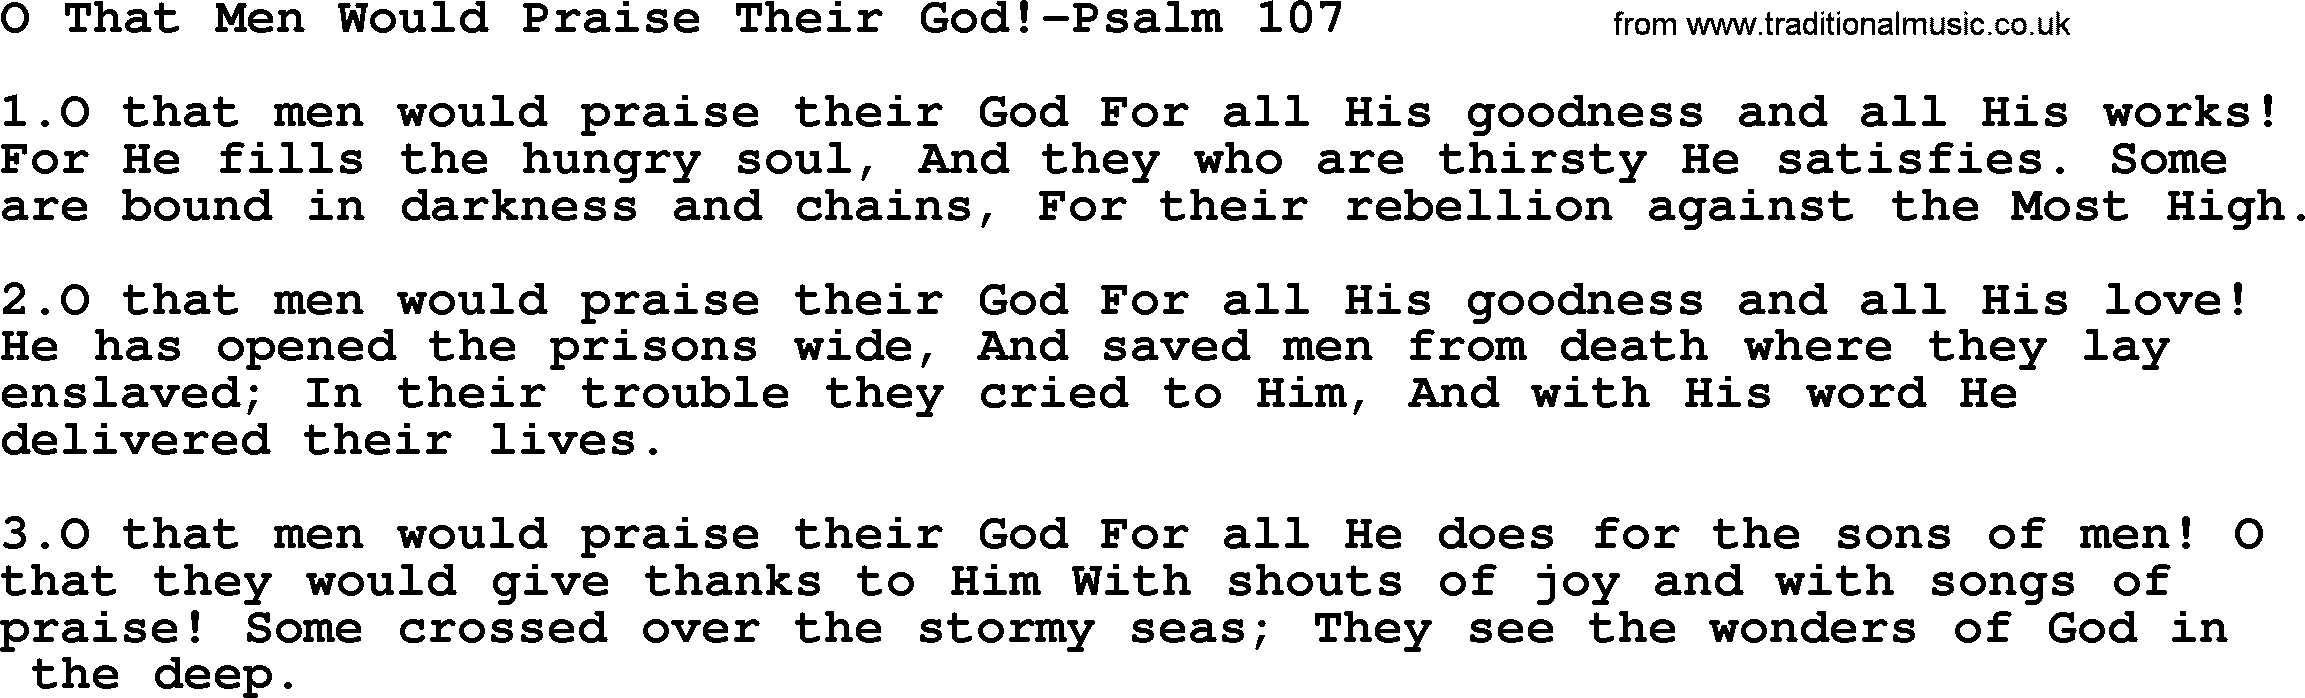 Hymns from the Psalms, Hymn: O That Men Would Praise Their God!-Psalm 107, lyrics with PDF